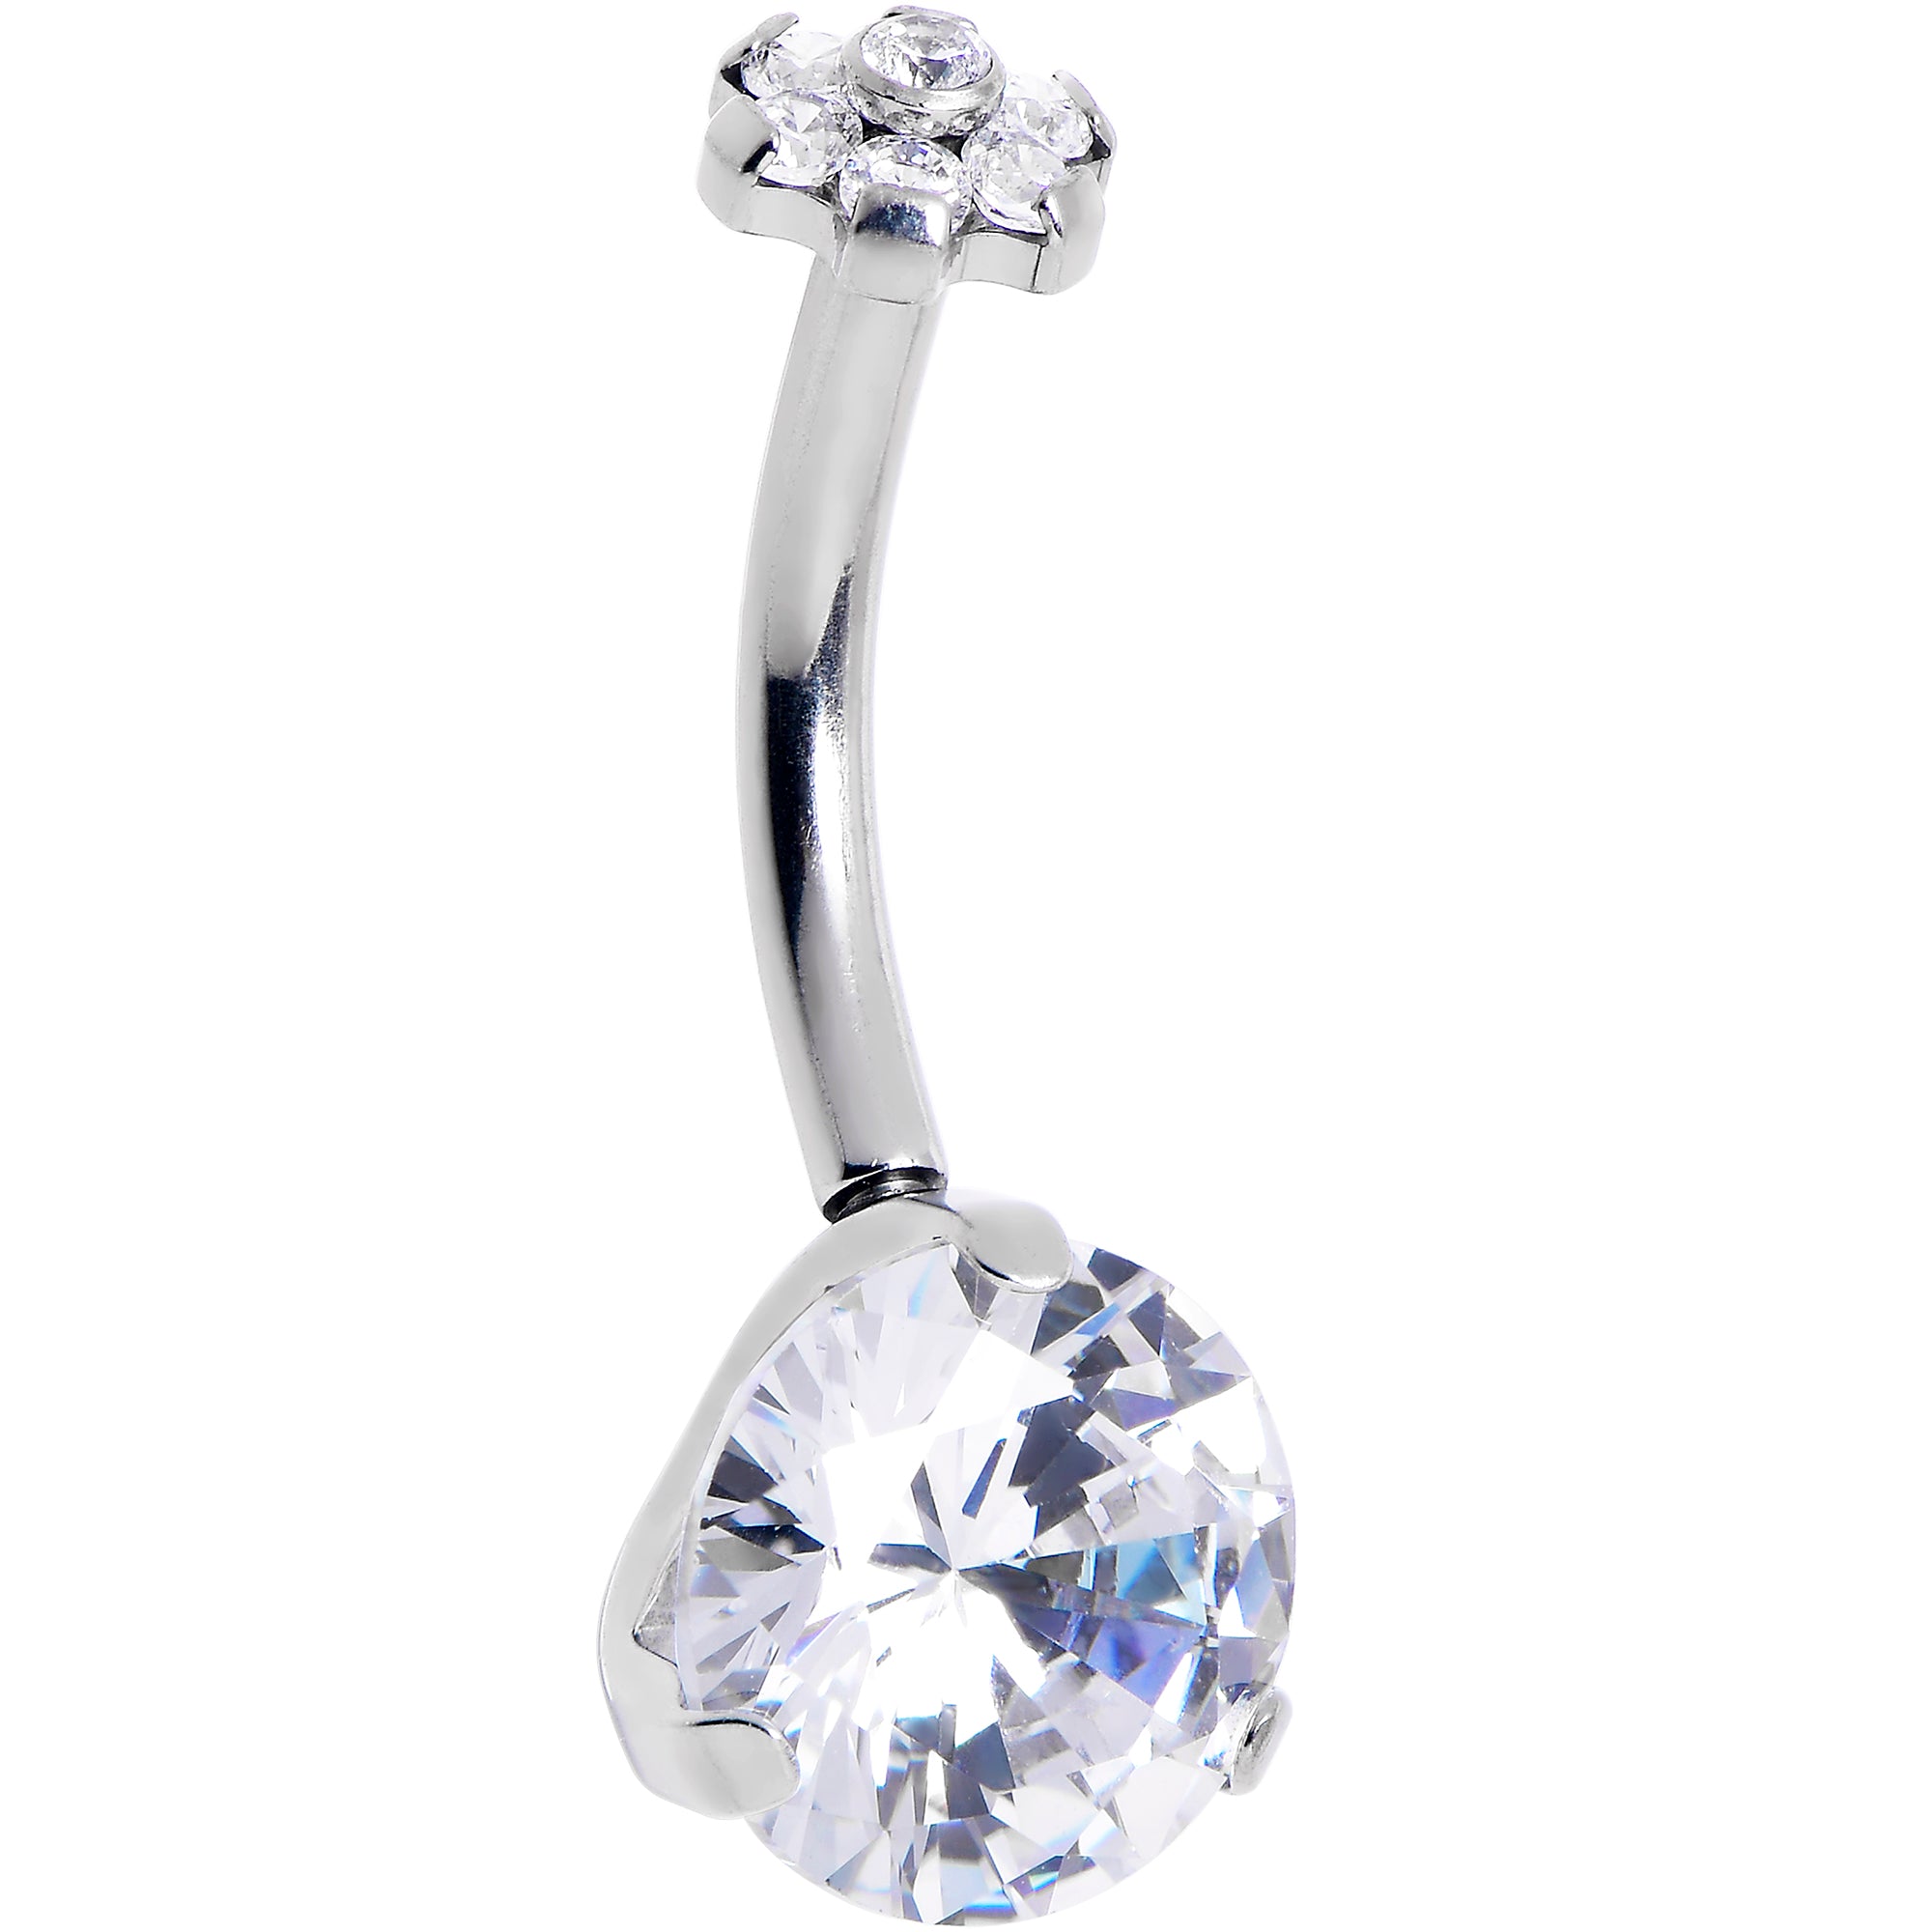 Clear CZ Gem ASTM F-136 Implant Grade Titanium Threadless Double Mount Belly Ring